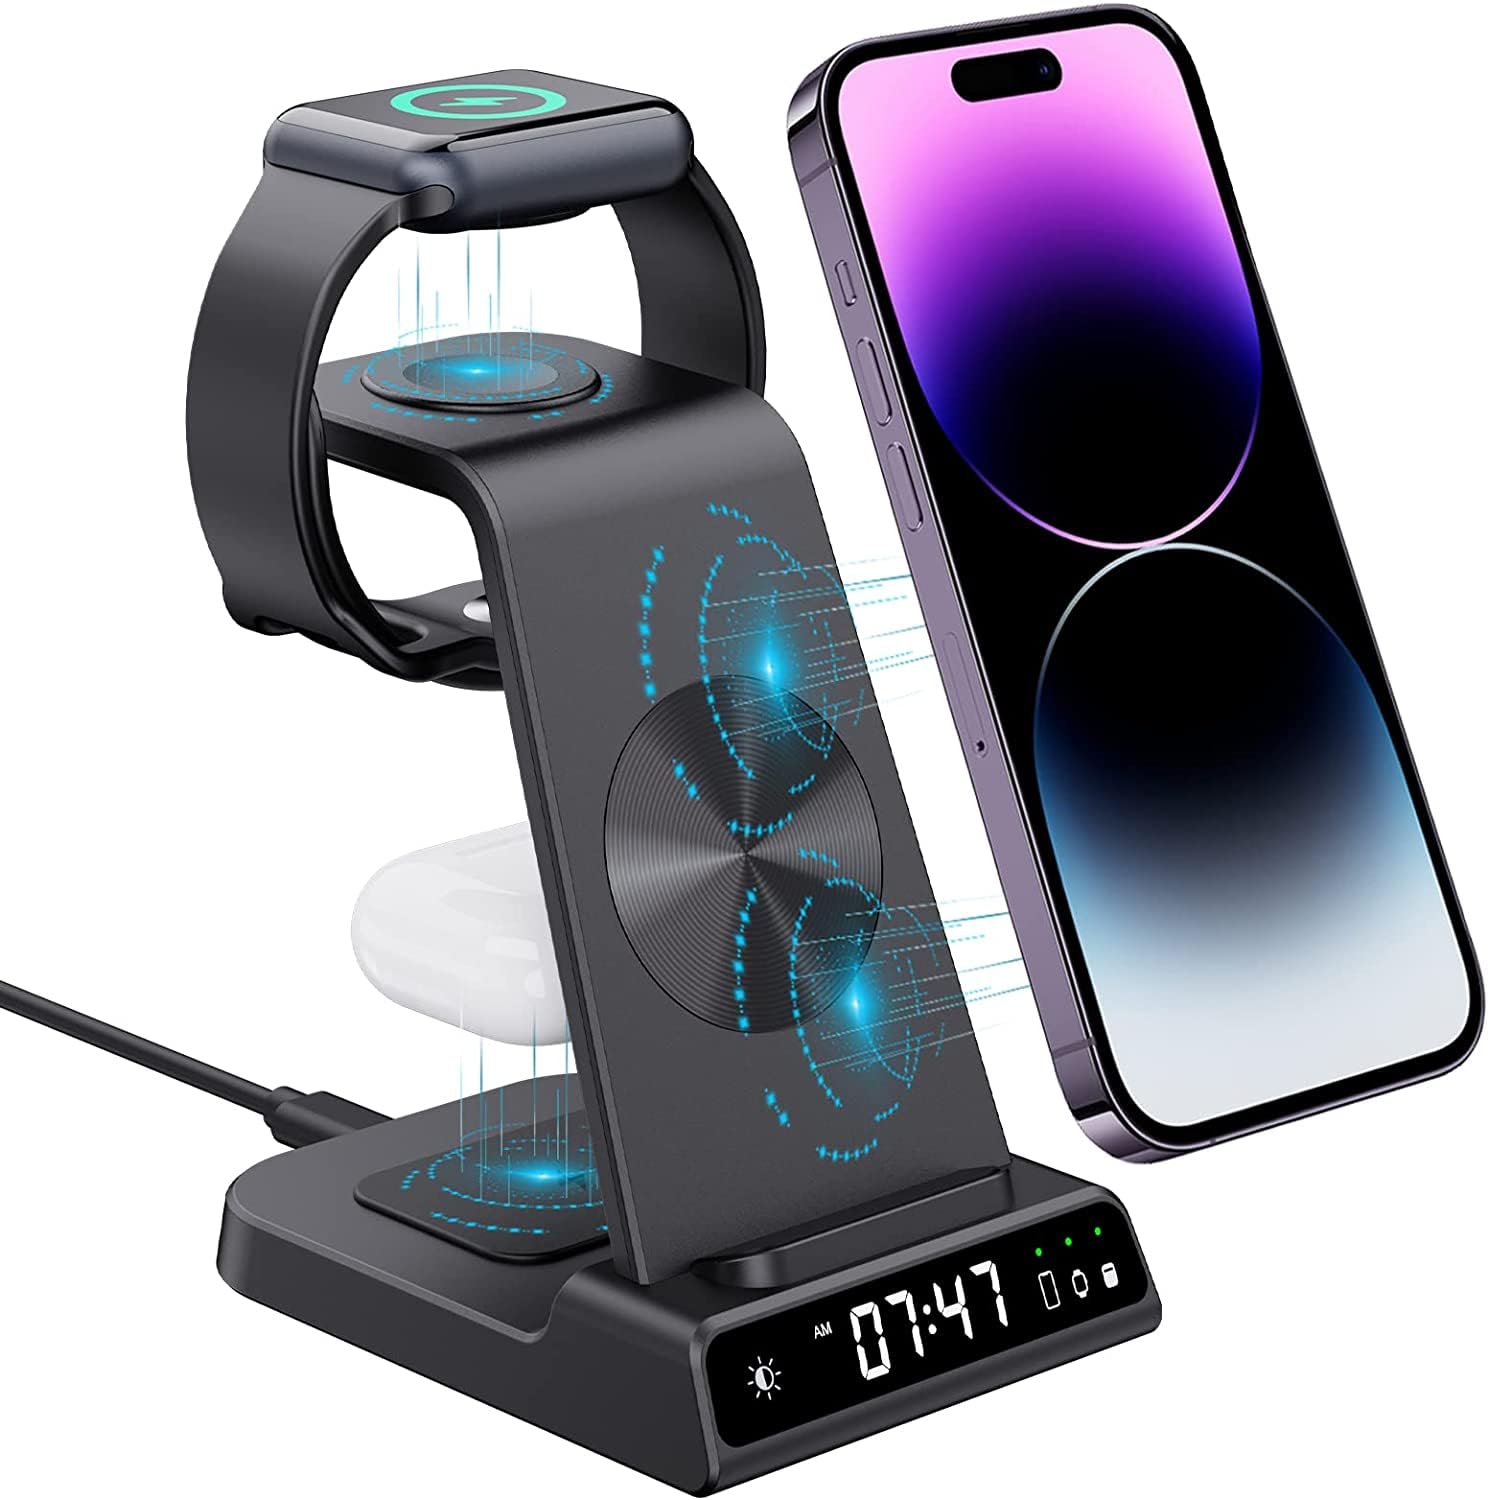 Wireless Charging Station, YiJYi 3 in 1 Watch Charger Stand with Digital Clock Suitable for iWatch SE/6/5/4/3/2/1,AirPods Pro, for iPhone 13/12/12 Pro Max/11 Series/XS/XR/X/8/Samsung Galaxy